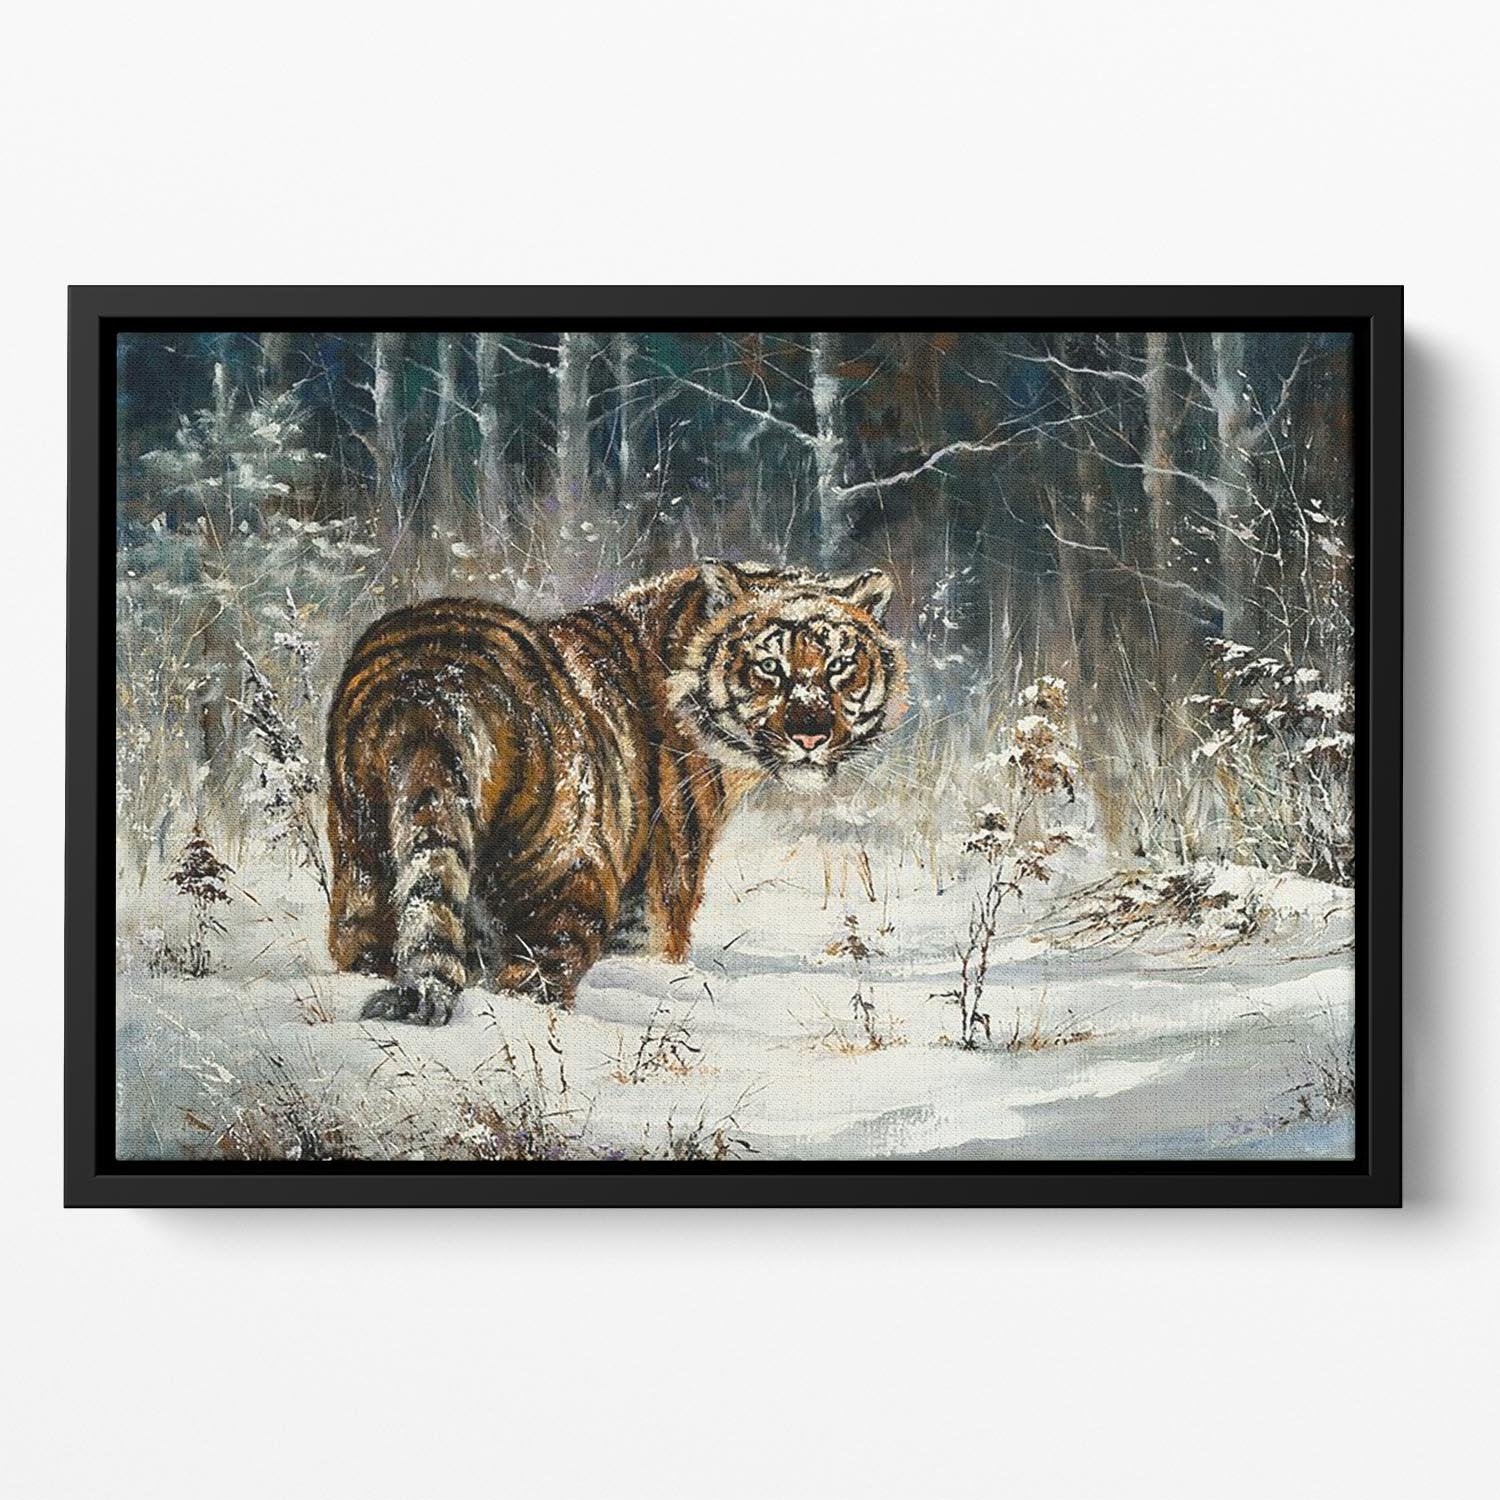 Landscape with a tiger in winter wood Floating Framed Canvas - Canvas Art Rocks - 2